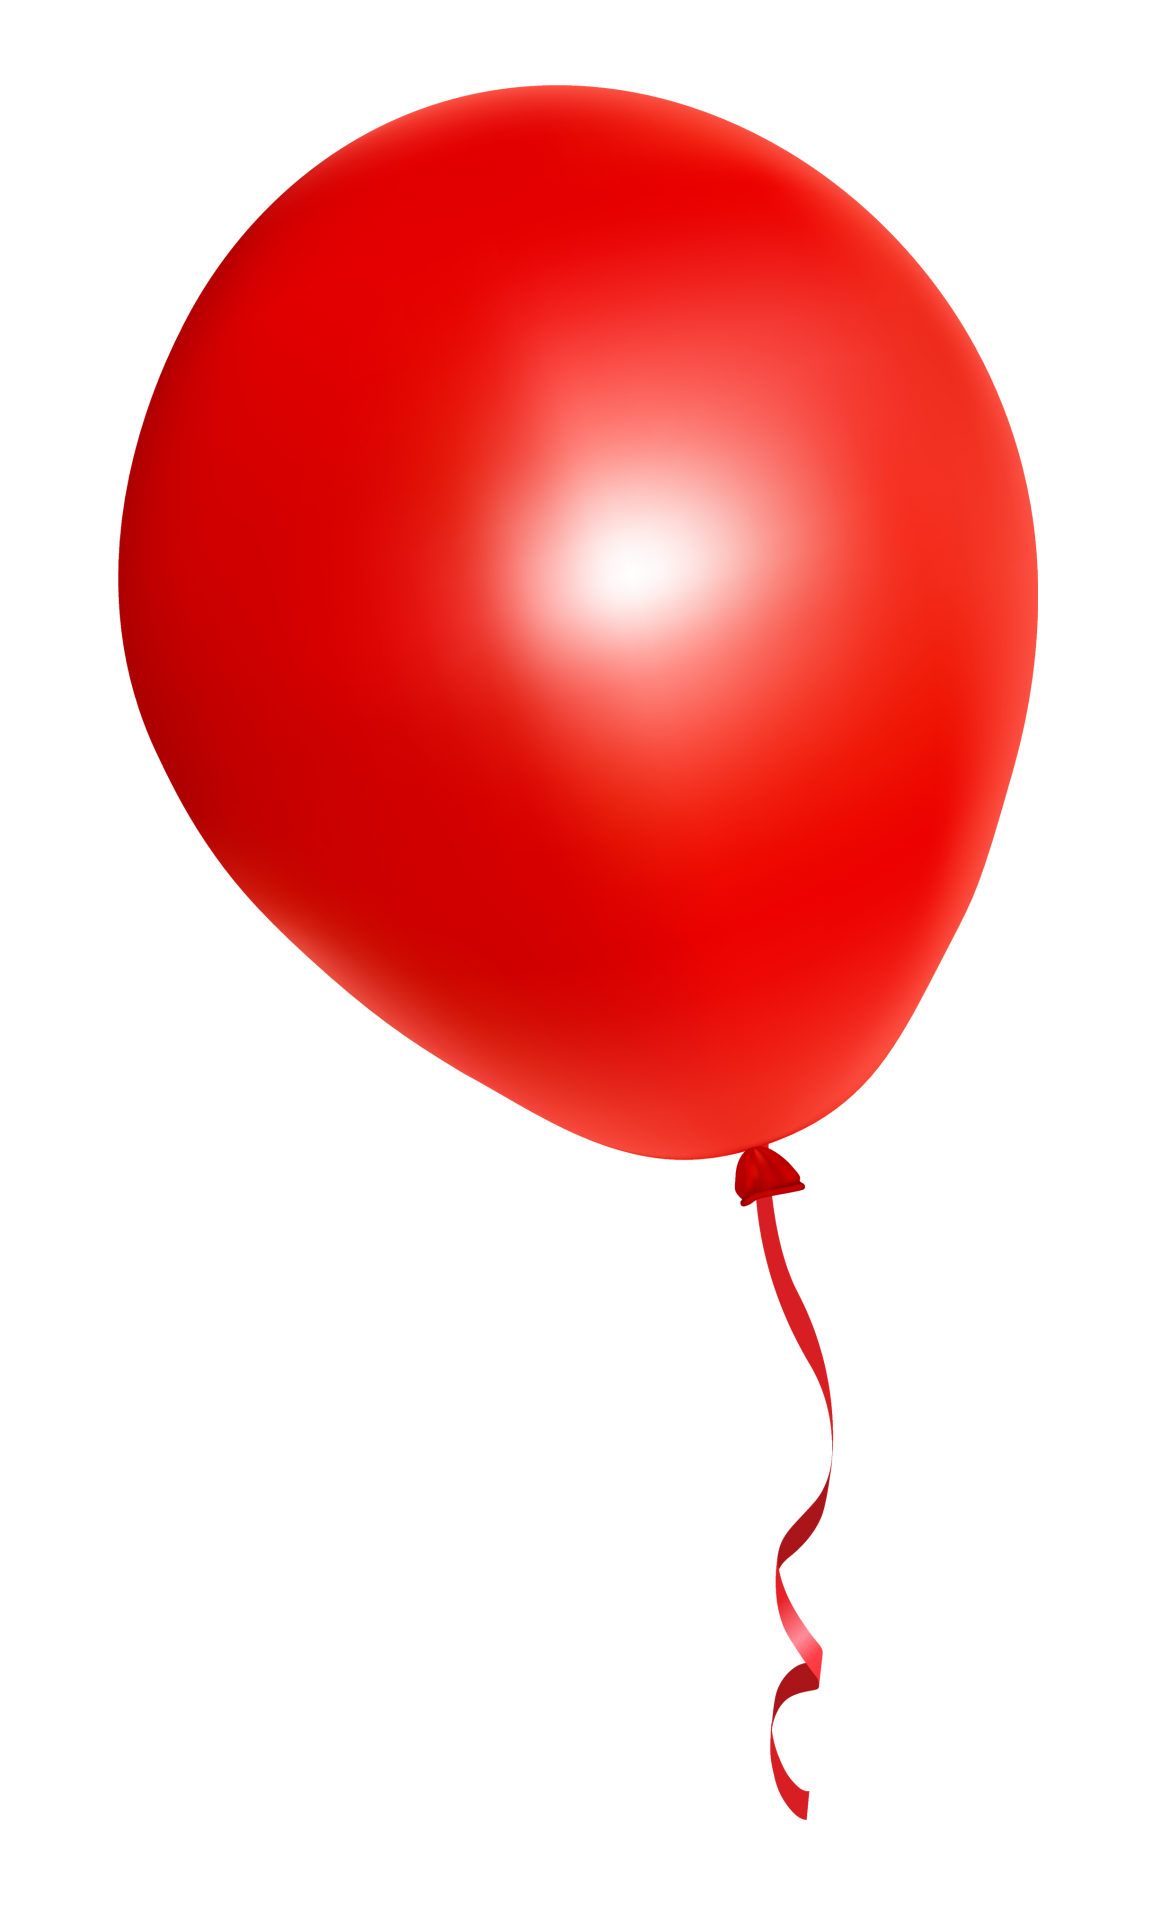 PNGPIX-COM-Red-Balloon-PNG-Image-1.png